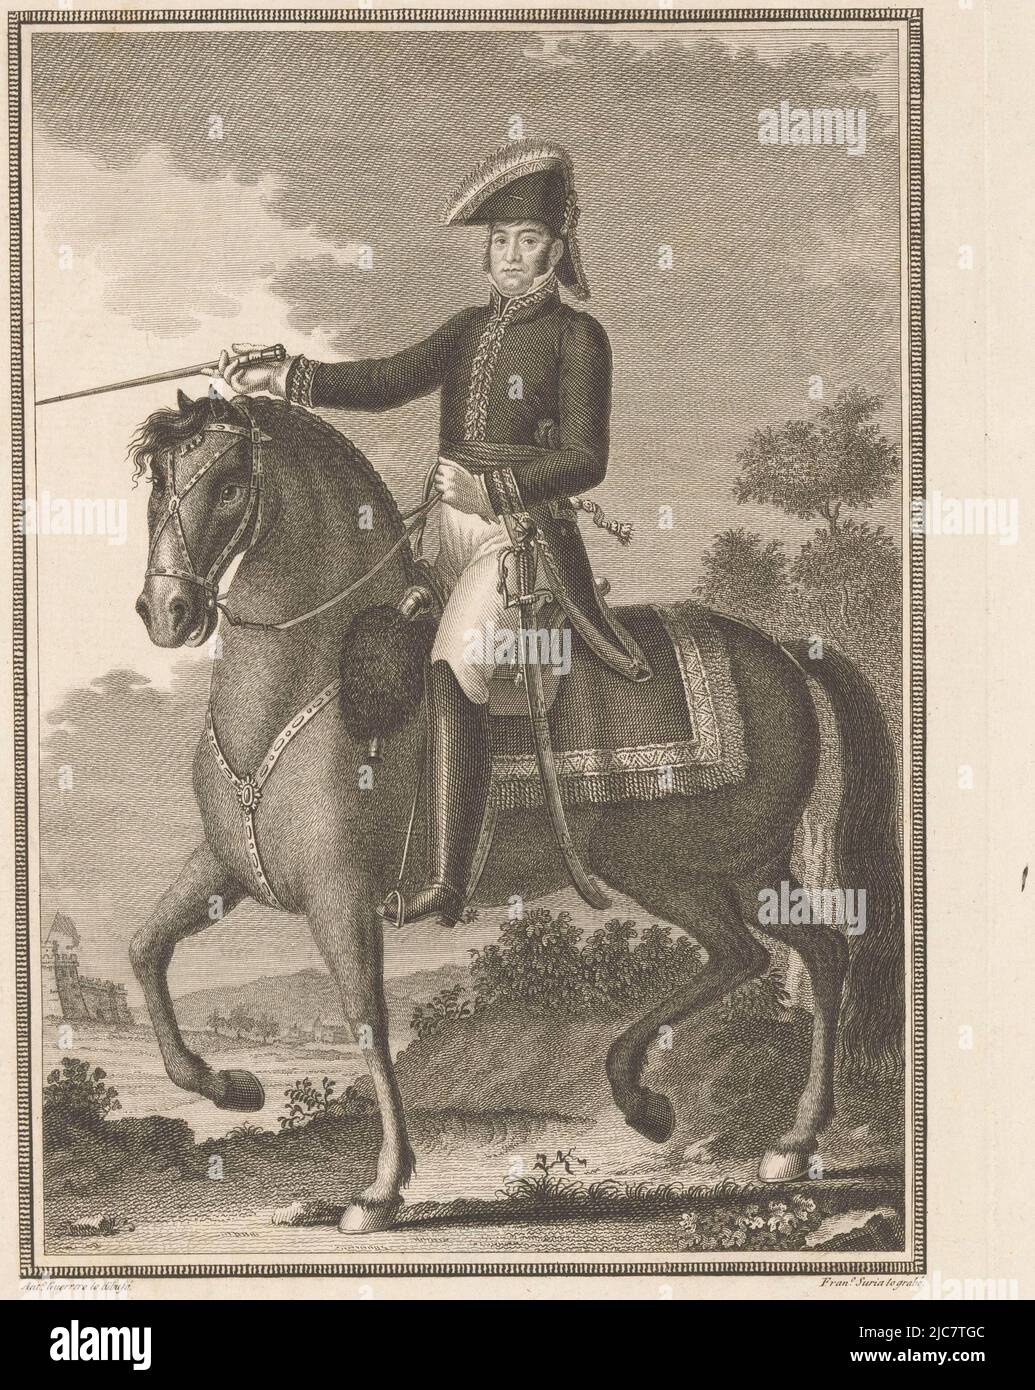 Equestrian portrait of Francisco Ballesteros, print maker: Francisco Suría, (mentioned on object), intermediary draughtsman: Antonio Guerrero, (mentioned on object), Spain, 1797 - 1836, paper, etching, h 286 mm × w 187 mm Stock Photo